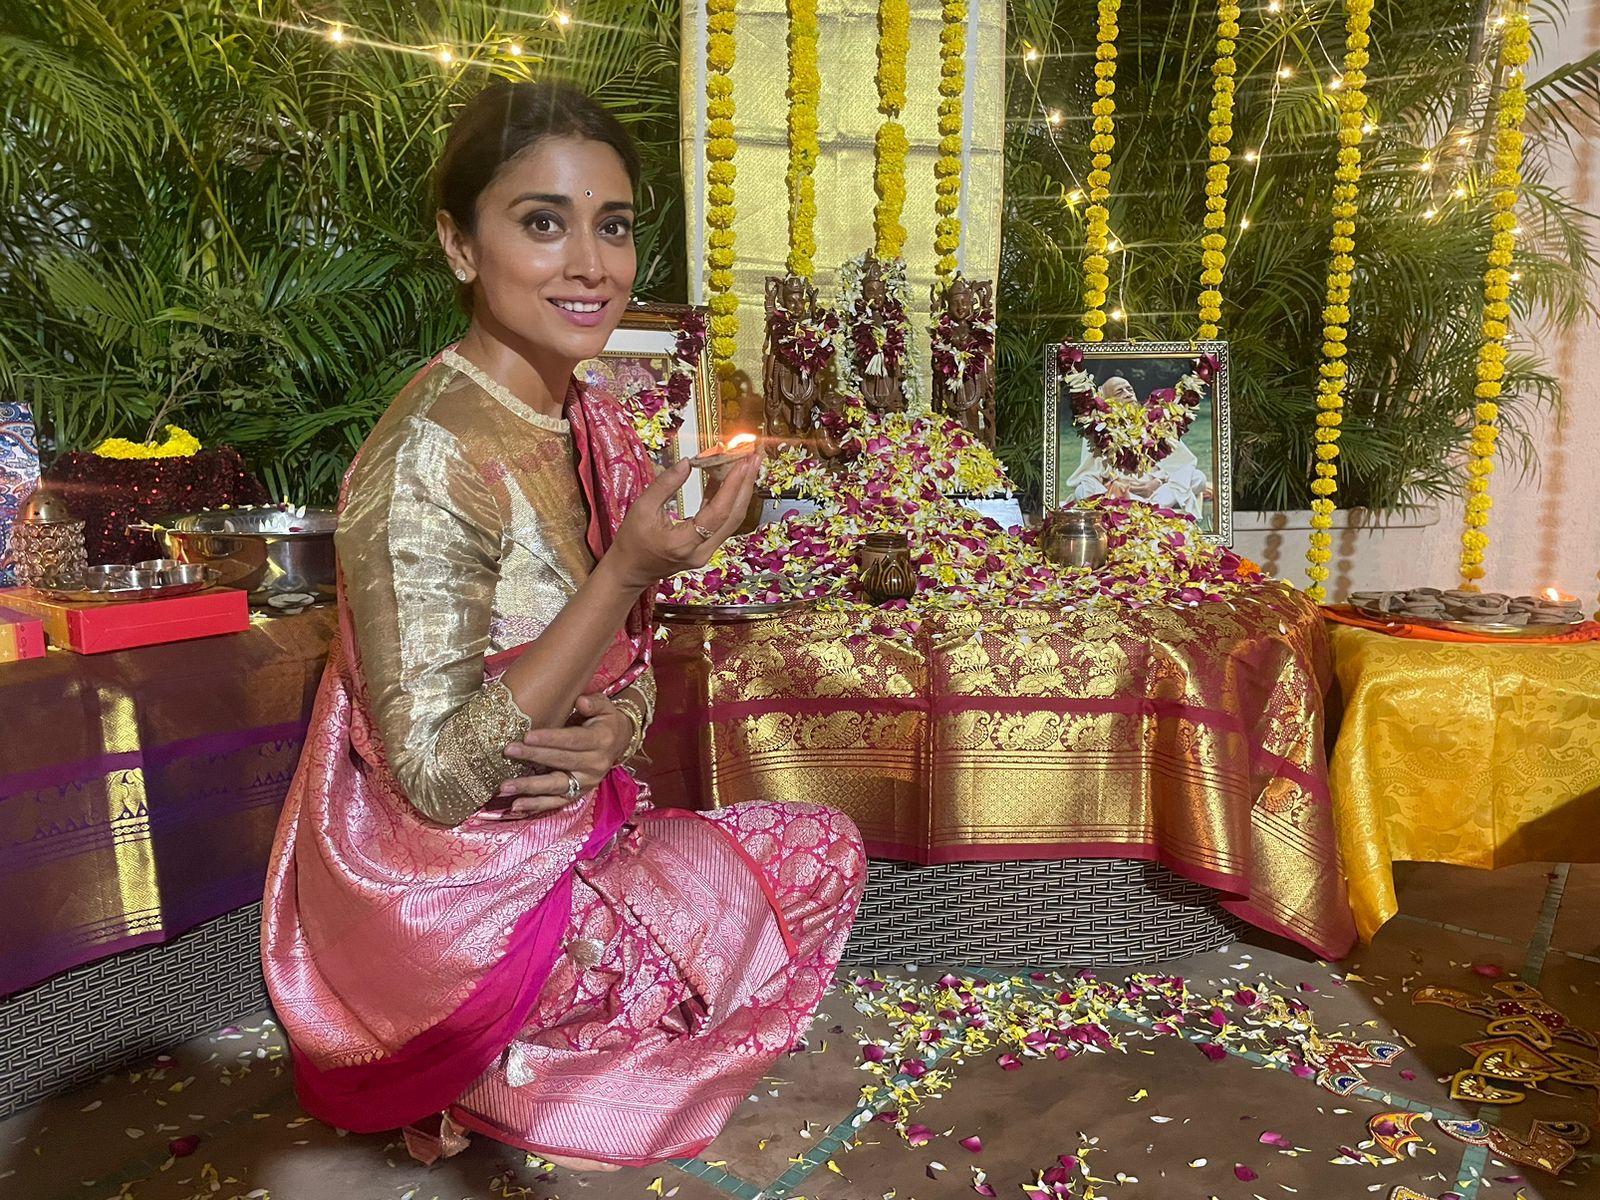 Actress Shriya Saran commemorated the inauguration of Ram Mandir by wearing her wedding saree. While it was a sweet celebration, the actress looked very graceful in her wedding attire. She took to Instagram and wrote, 